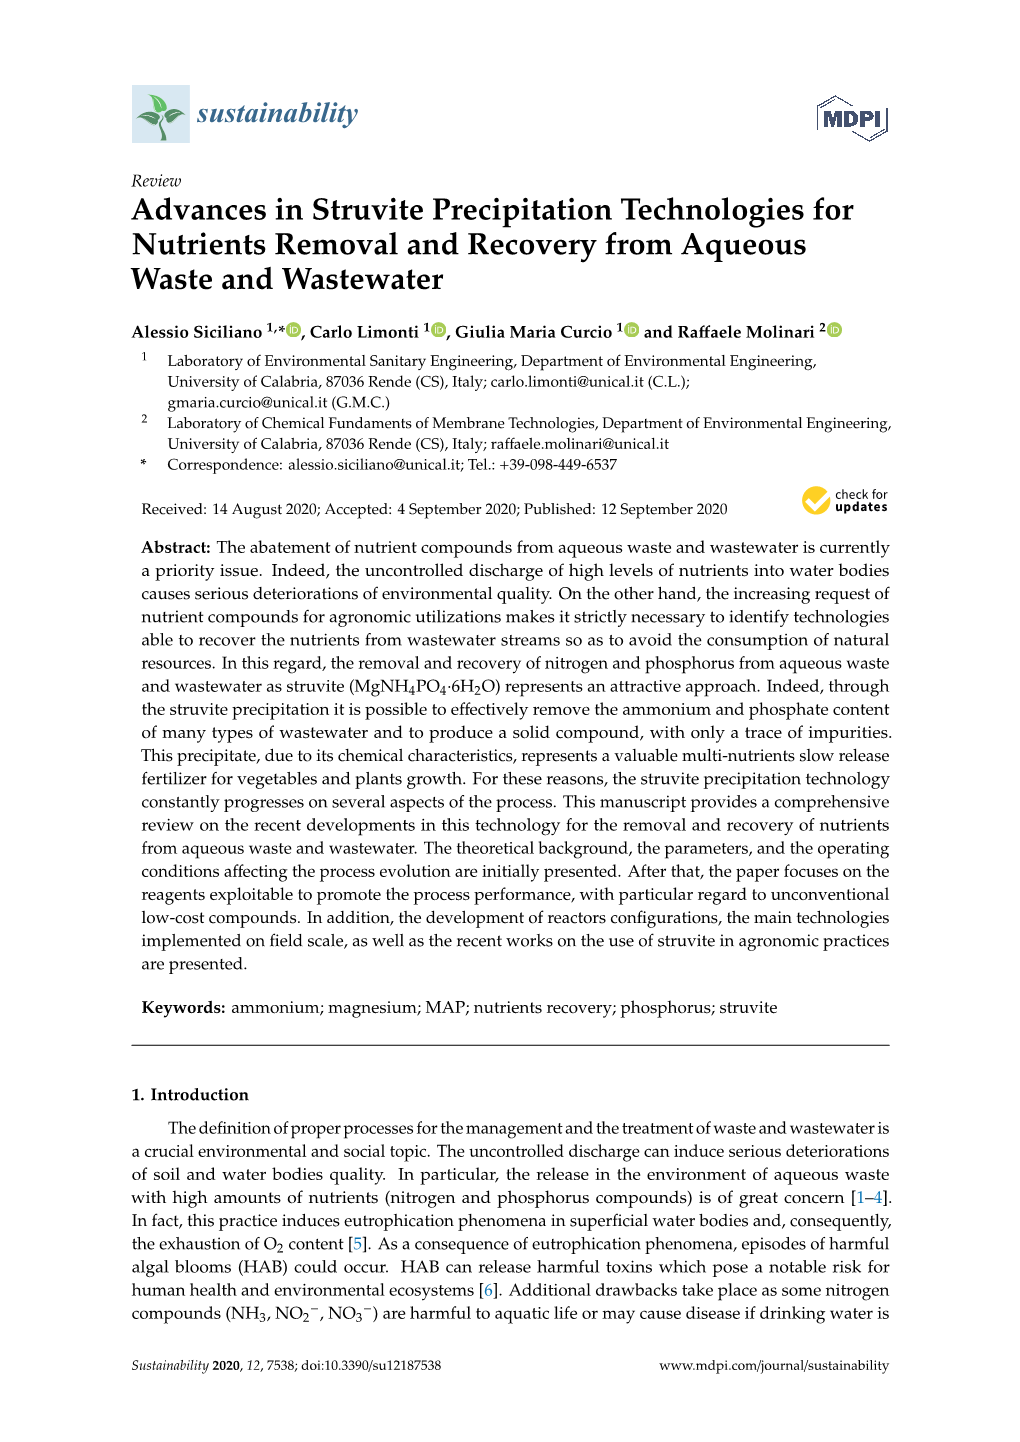 Advances in Struvite Precipitation Technologies for Nutrients Removal and Recovery from Aqueous Waste and Wastewater